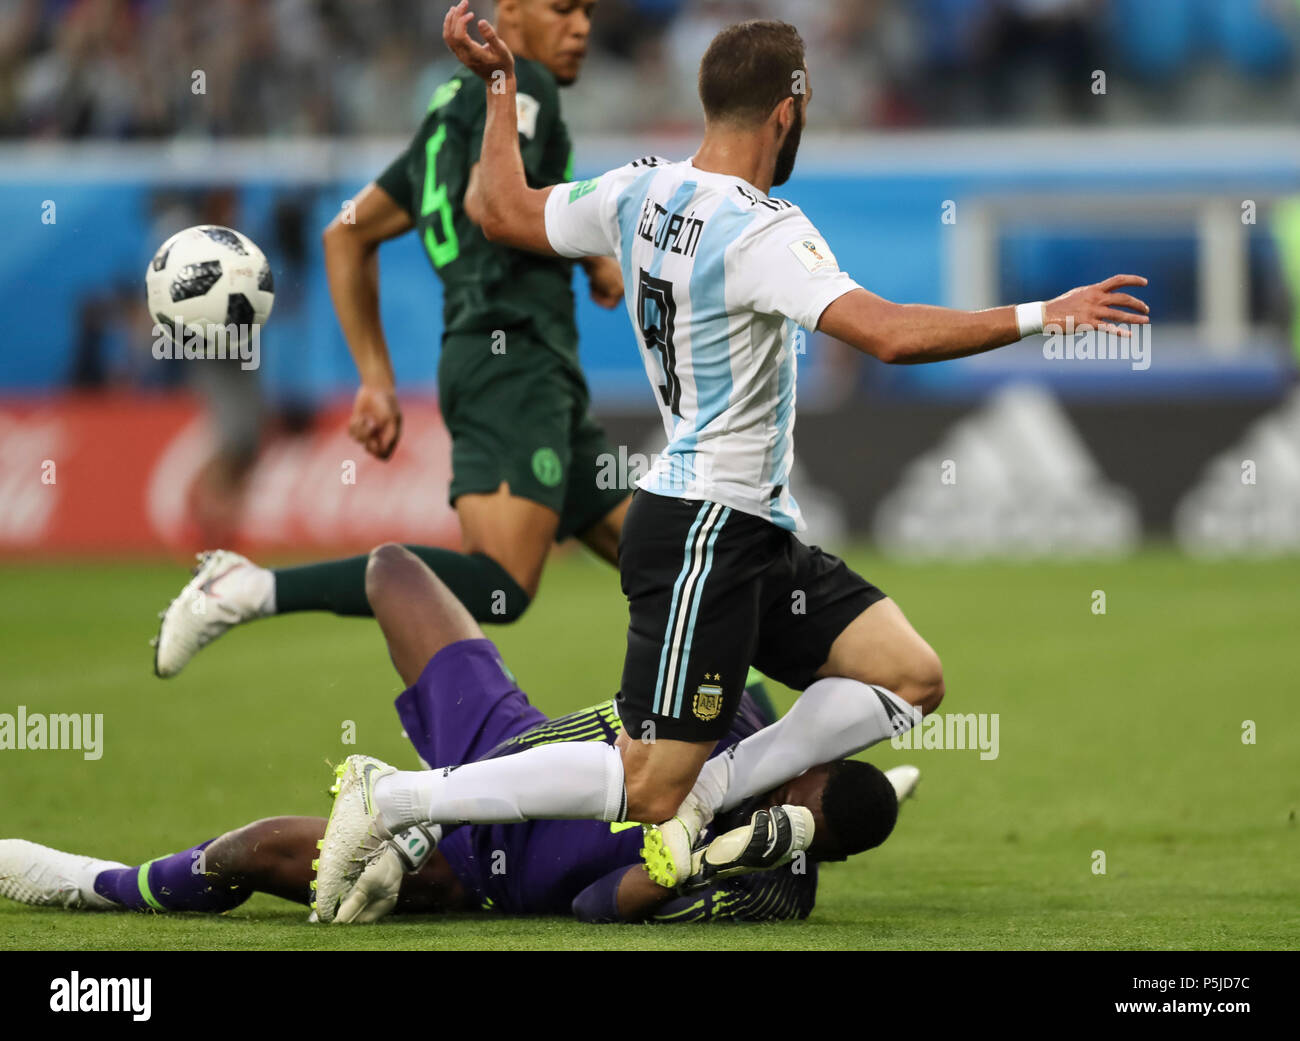 St Petersburg, Russia, 27 June 2018. Gonzalo Higuain of Argentina collides with Francis Uzoho of Nigeria during the 2018 FIFA World Cup Group D match between Nigeria and Argentina at Saint Petersburg Stadium on June 26th 2018 in Saint Petersburg, Russia. (Photo by Daniel Chesterton/phcimages.com) Credit: PHC Images/Alamy Live News Stock Photo